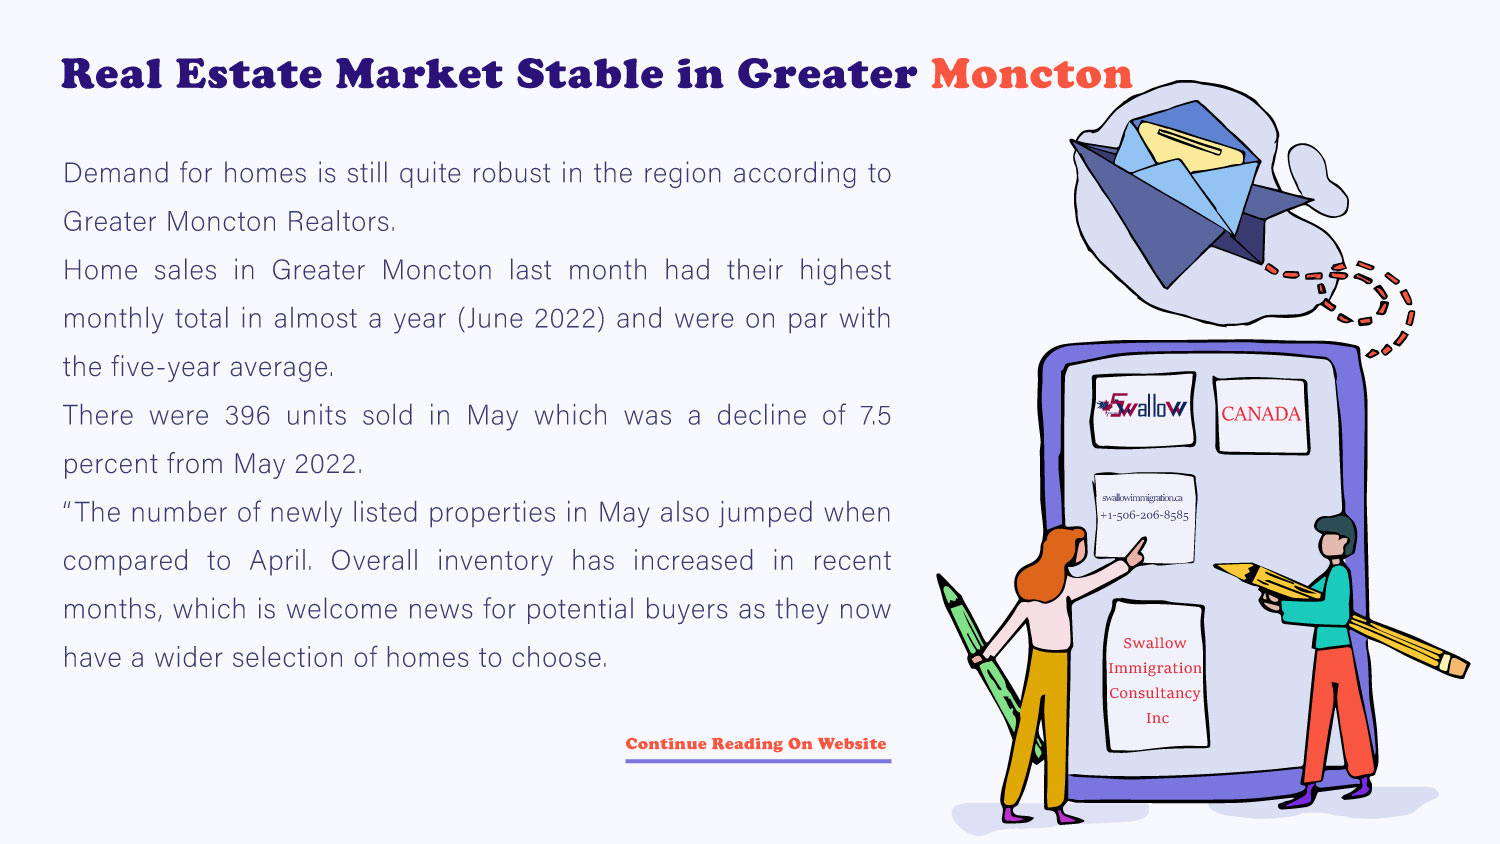 Real Estate Market Stable in Greater Moncton